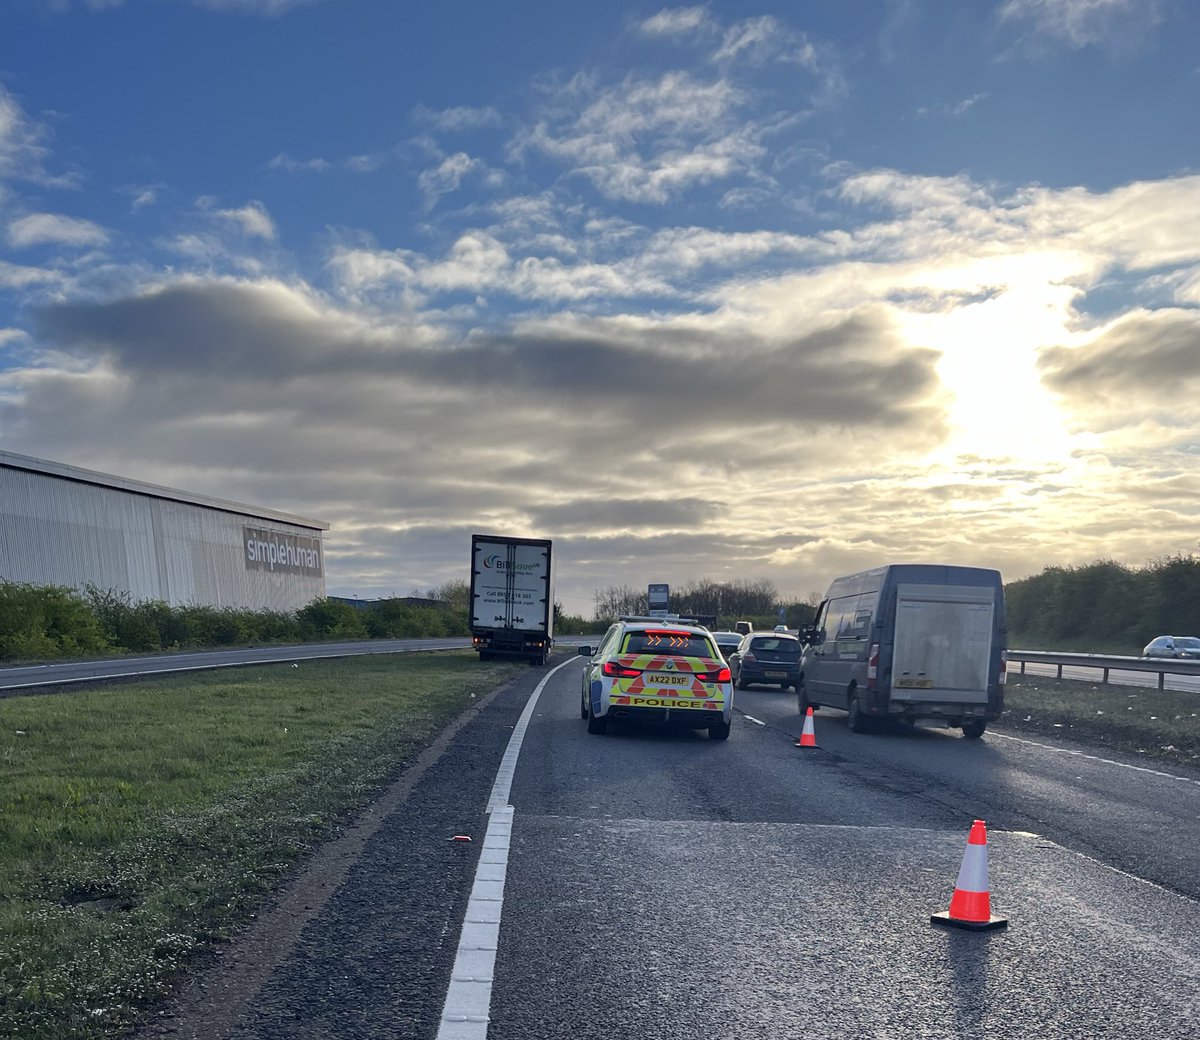 RP14 - #A14 Eastbound J13 - J14 Thrapston LANE 1 CLOSED due to a vehicle having a tyre blow-out. Please use caution on the approach.